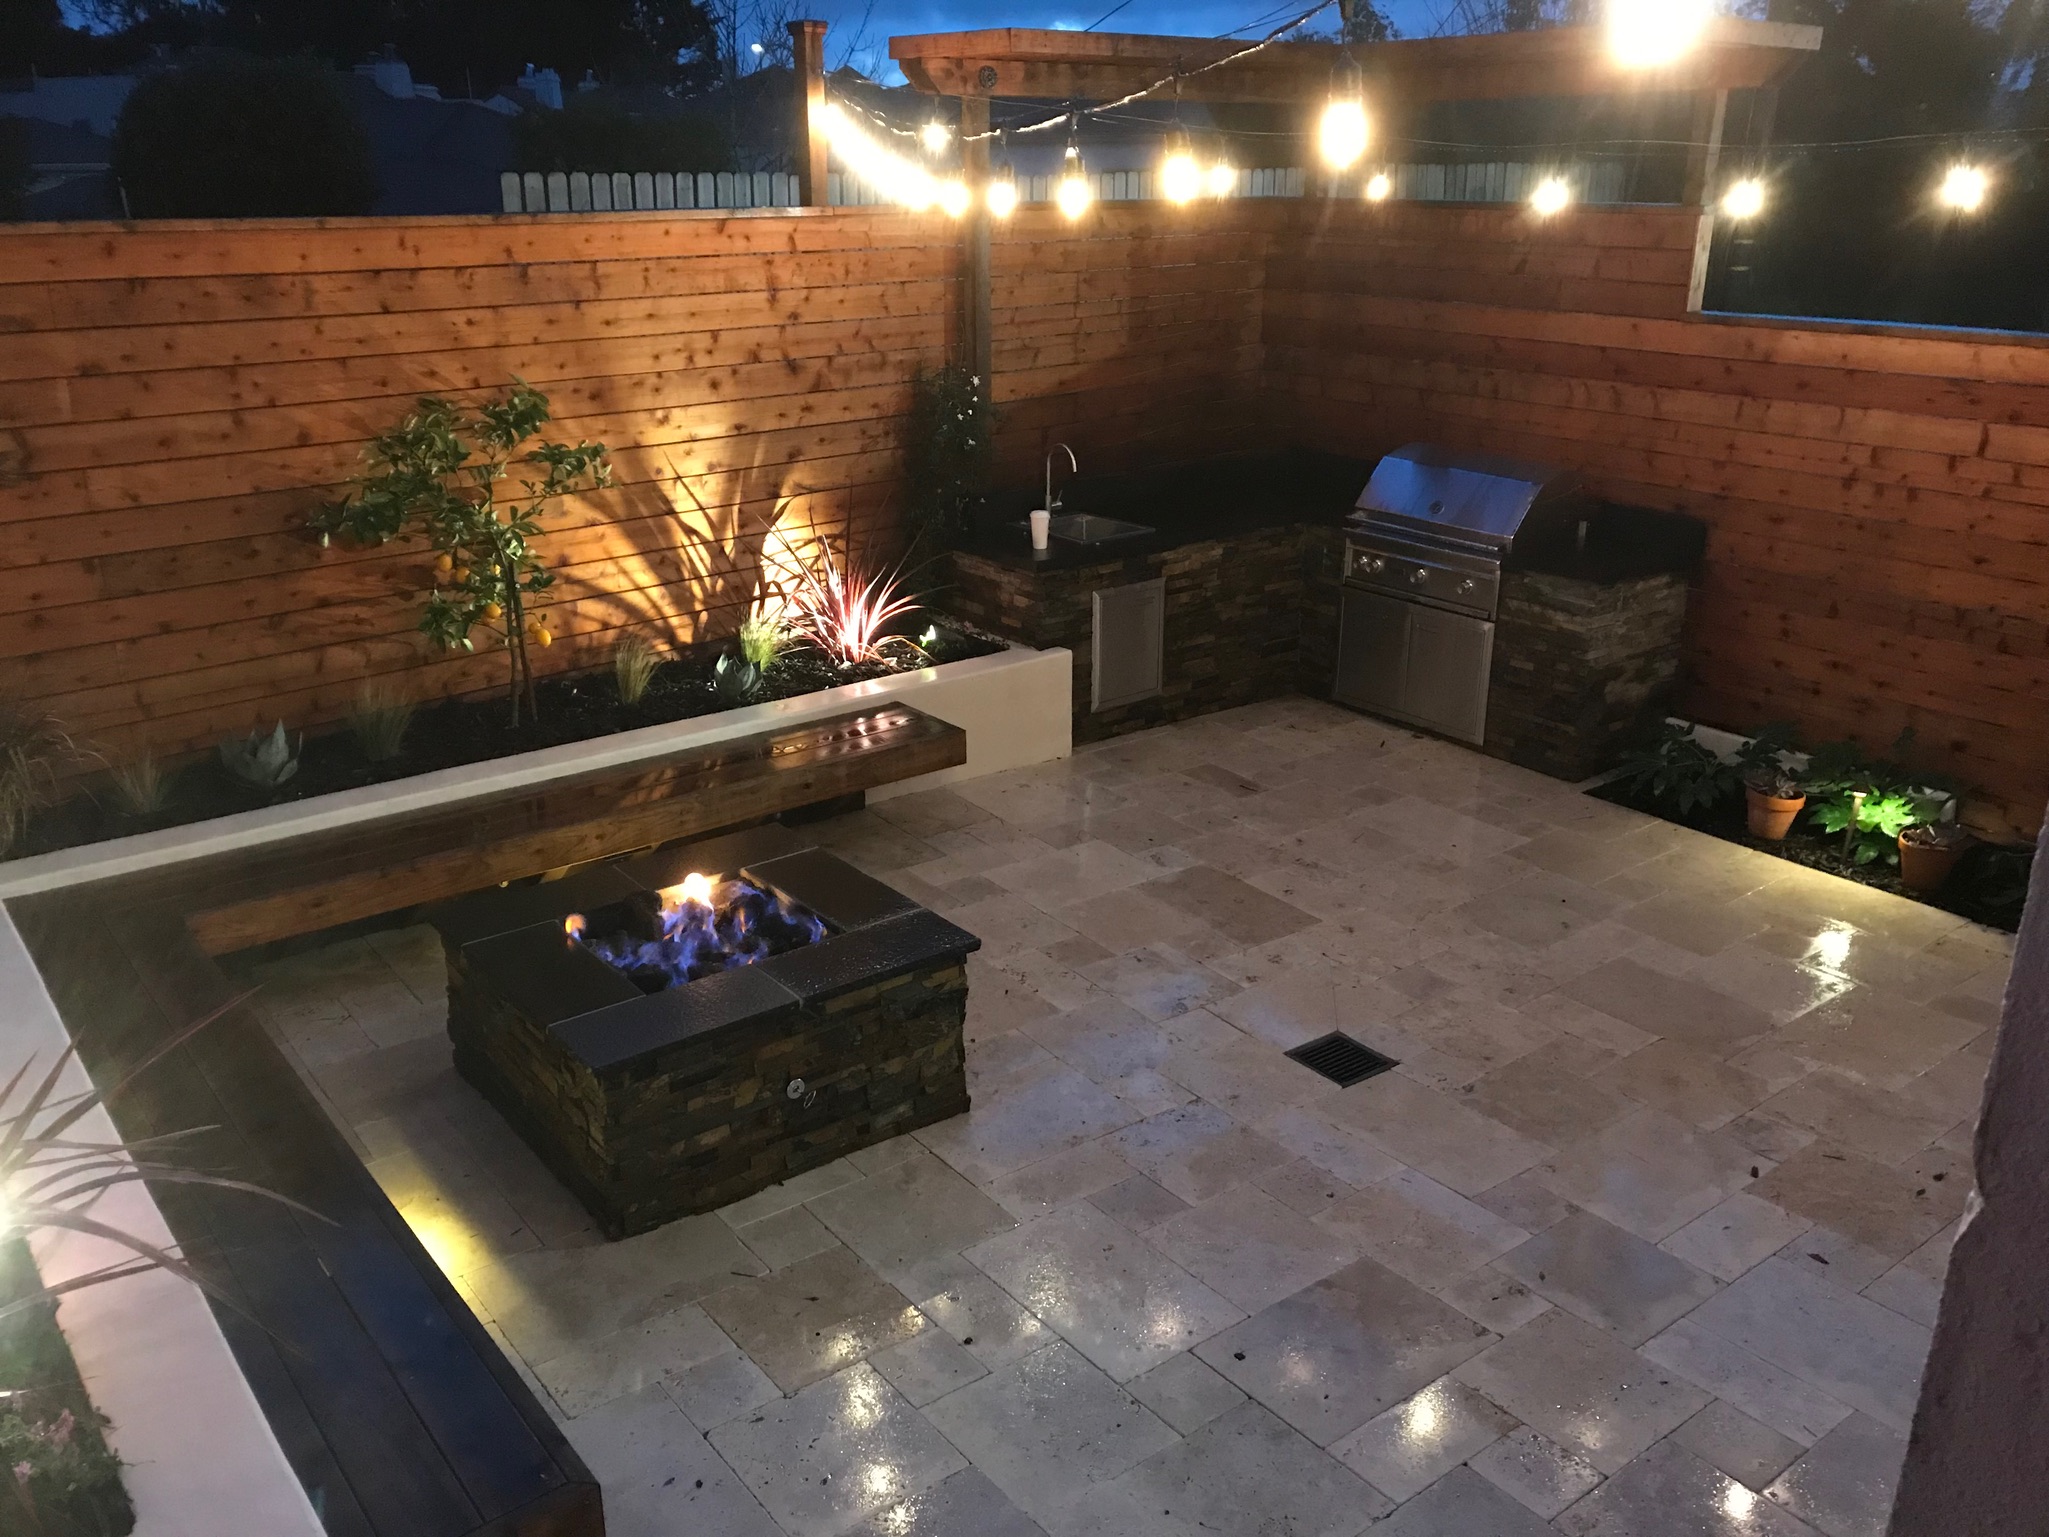 Modern, sustainable backyard complete with BBQ area and sink in back right corner. Fire pit and L-shaped redwood seating, backed with raised planters in left corner. Travertine pavers on ground and redwood fence in background.